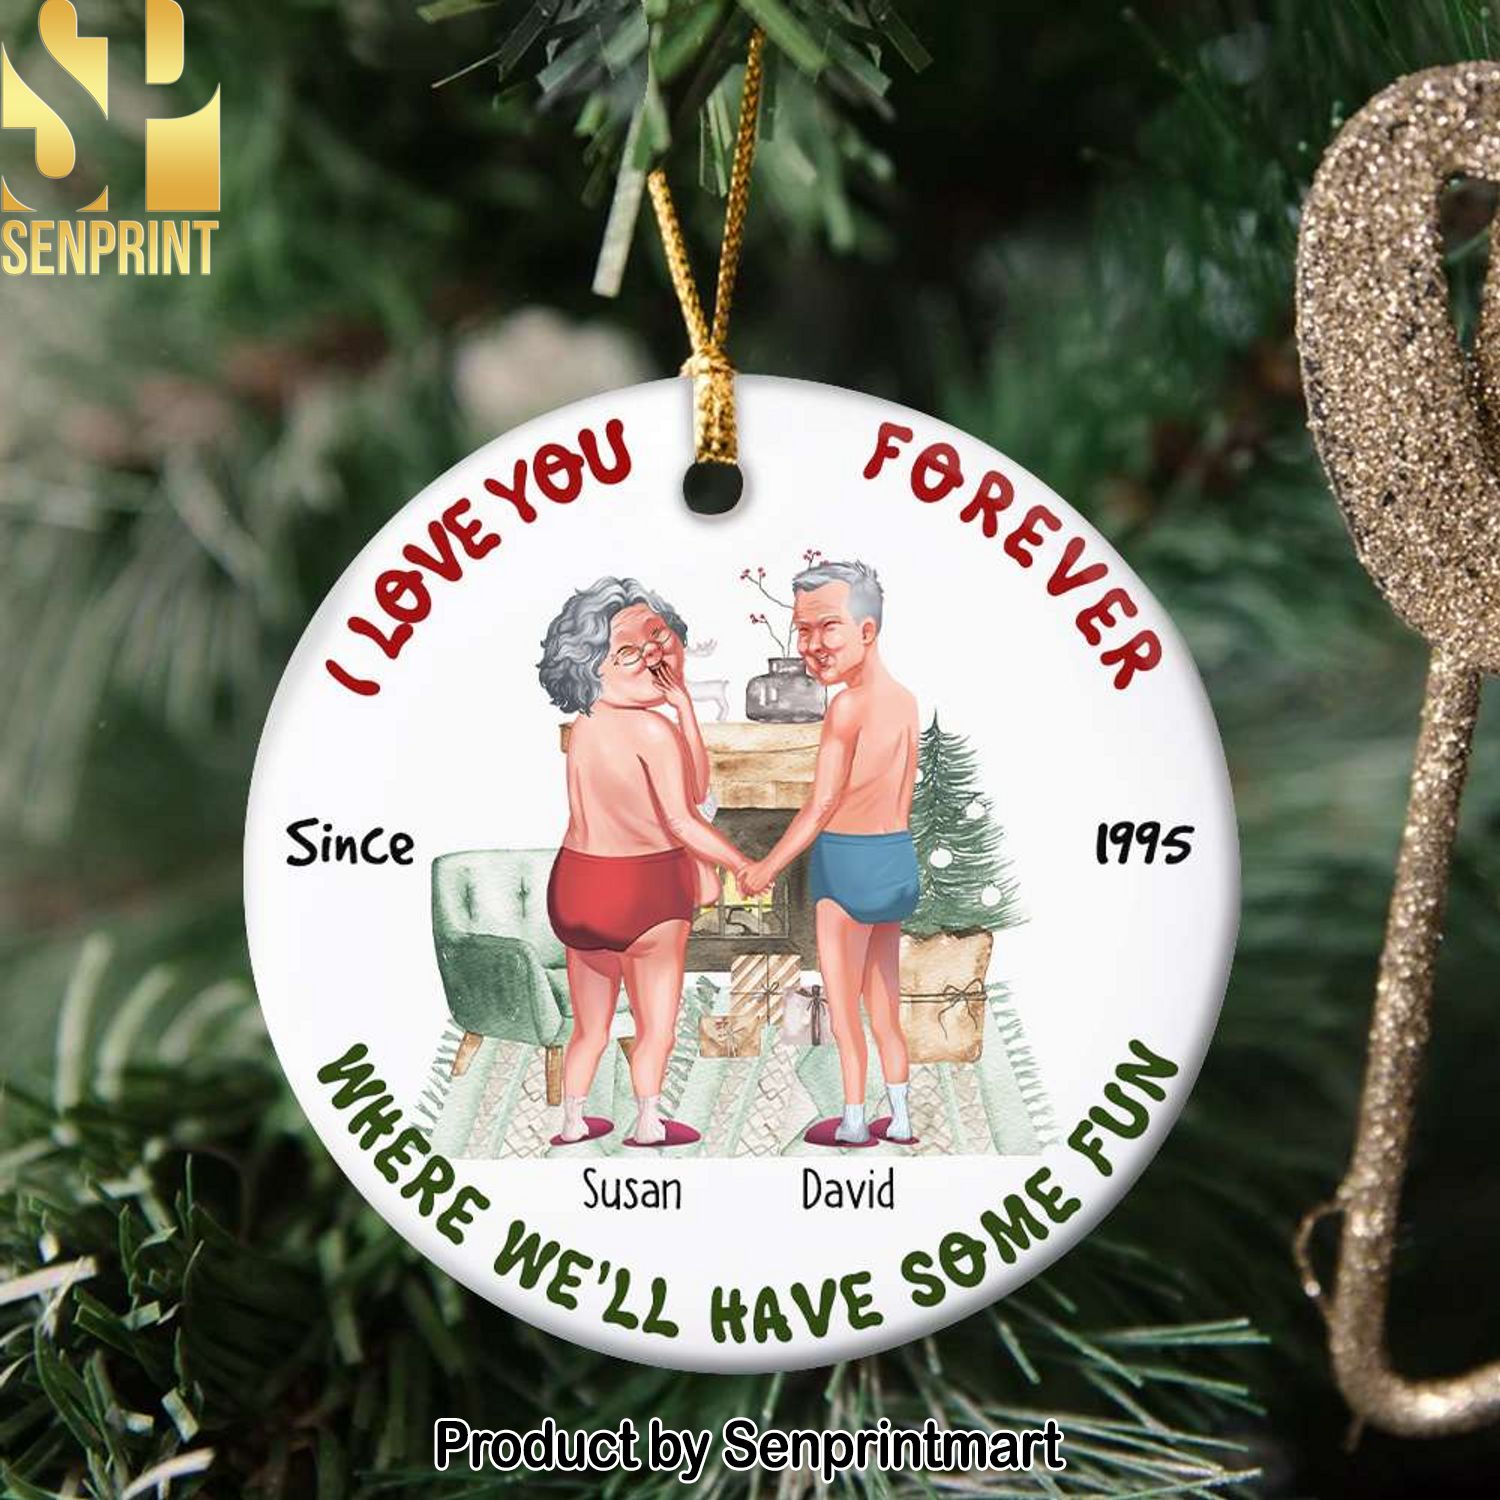 I Love You Forever, Couple Gift, Personalized Ceramic Ornament, Old Couple Ornament, Gift Ideas